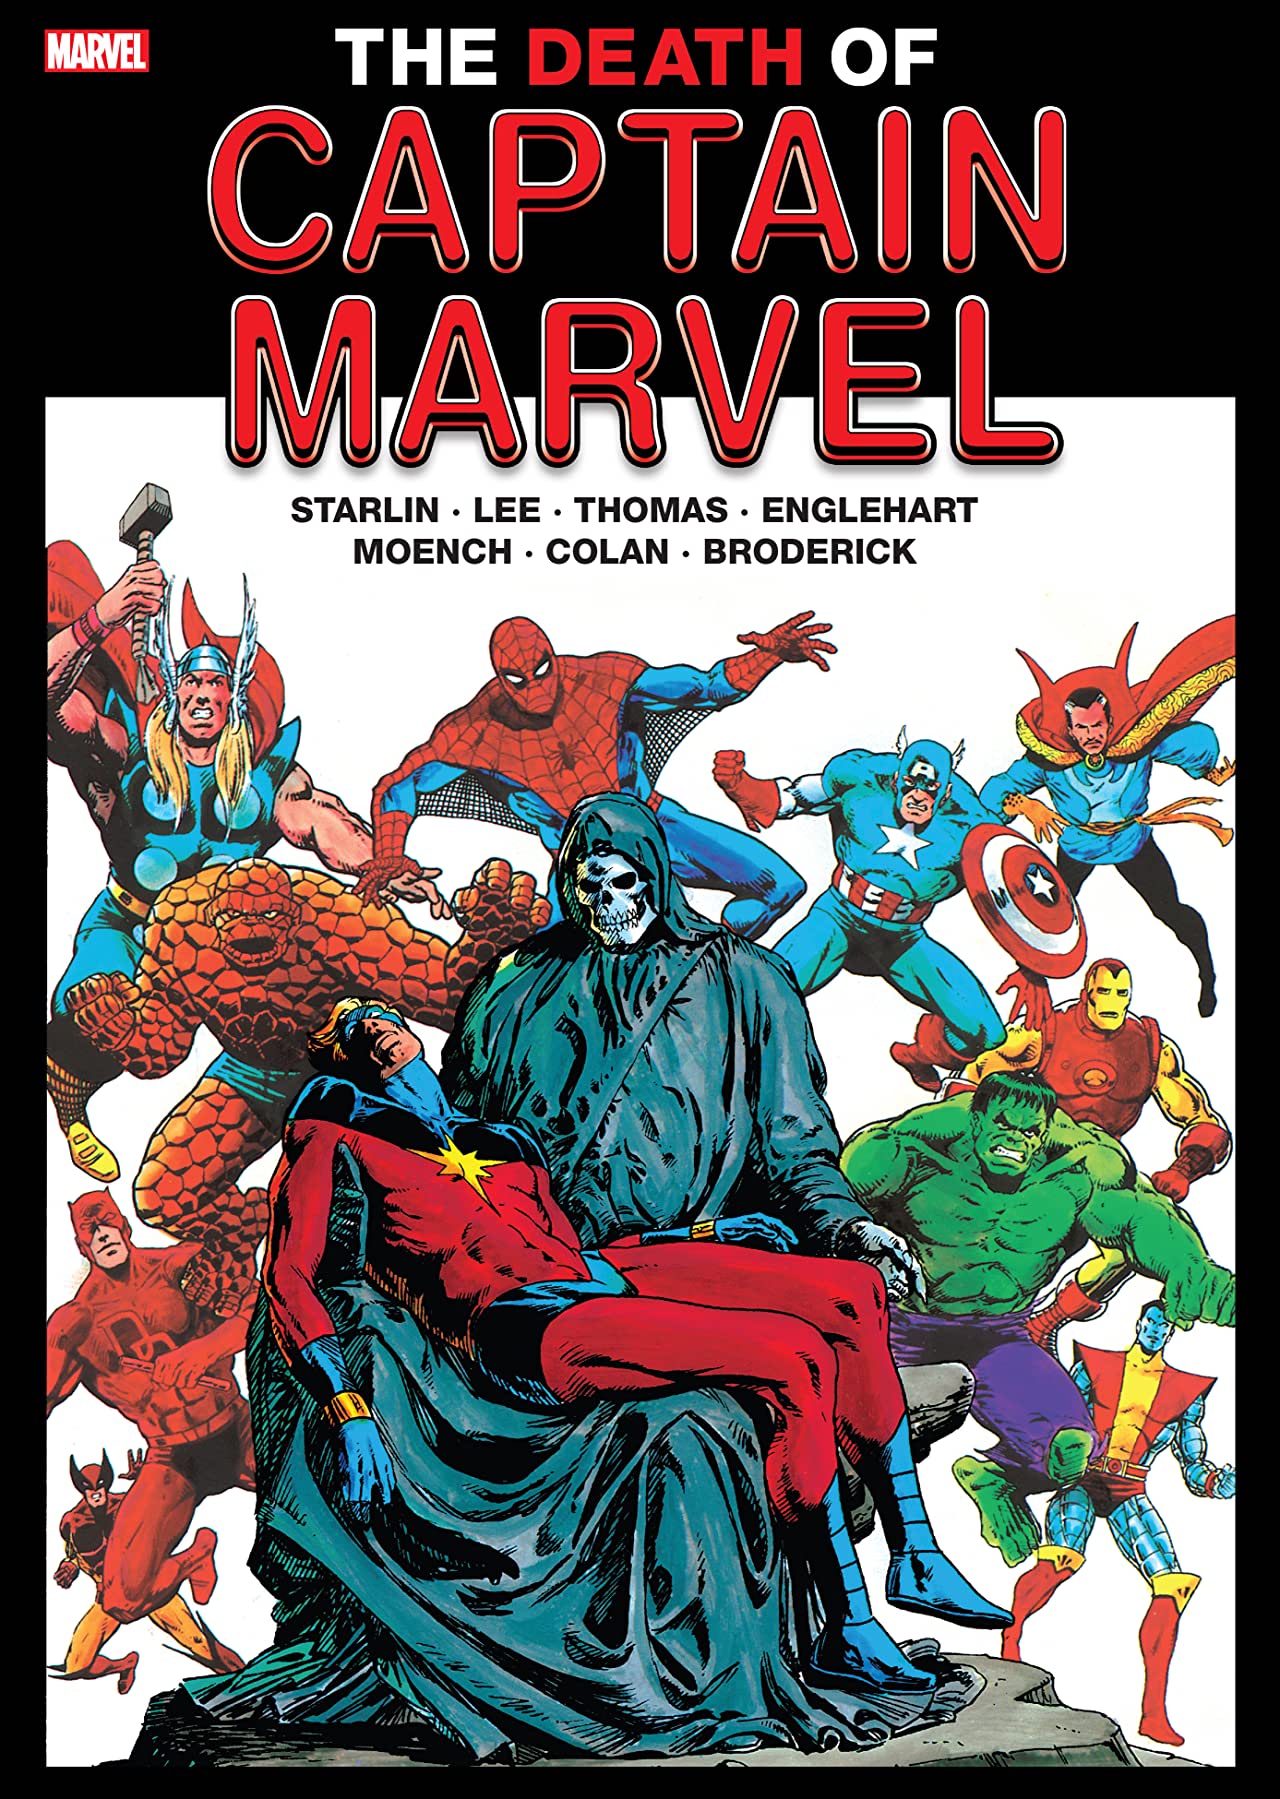 The Death Of Captain Marvel Gallery Edition (Hardcover)